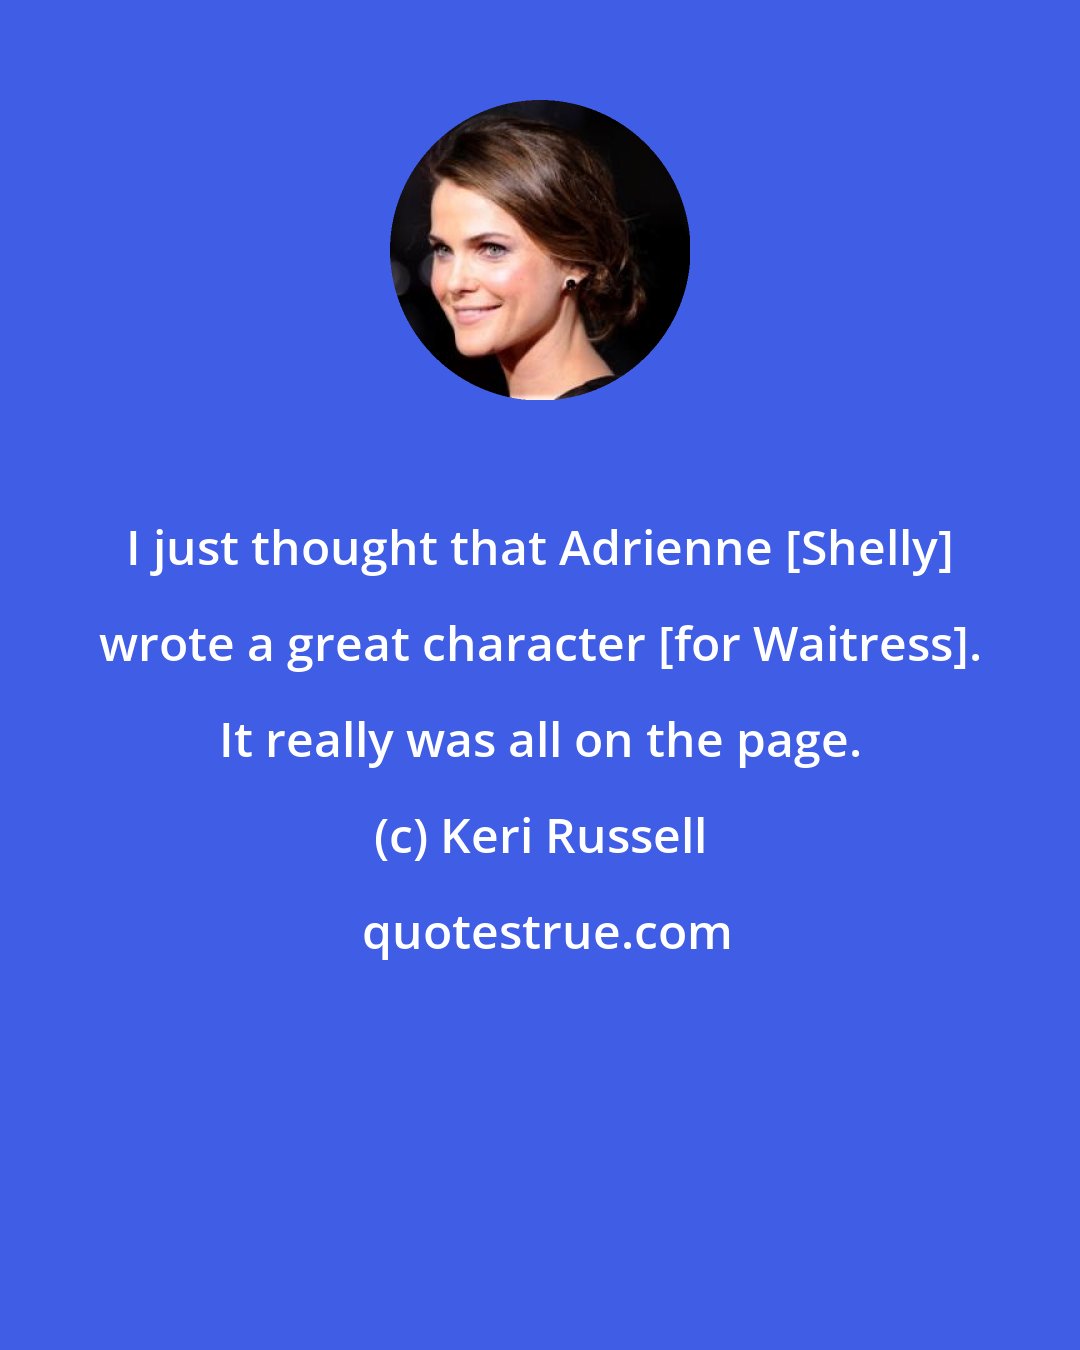 Keri Russell: I just thought that Adrienne [Shelly] wrote a great character [for Waitress]. It really was all on the page.